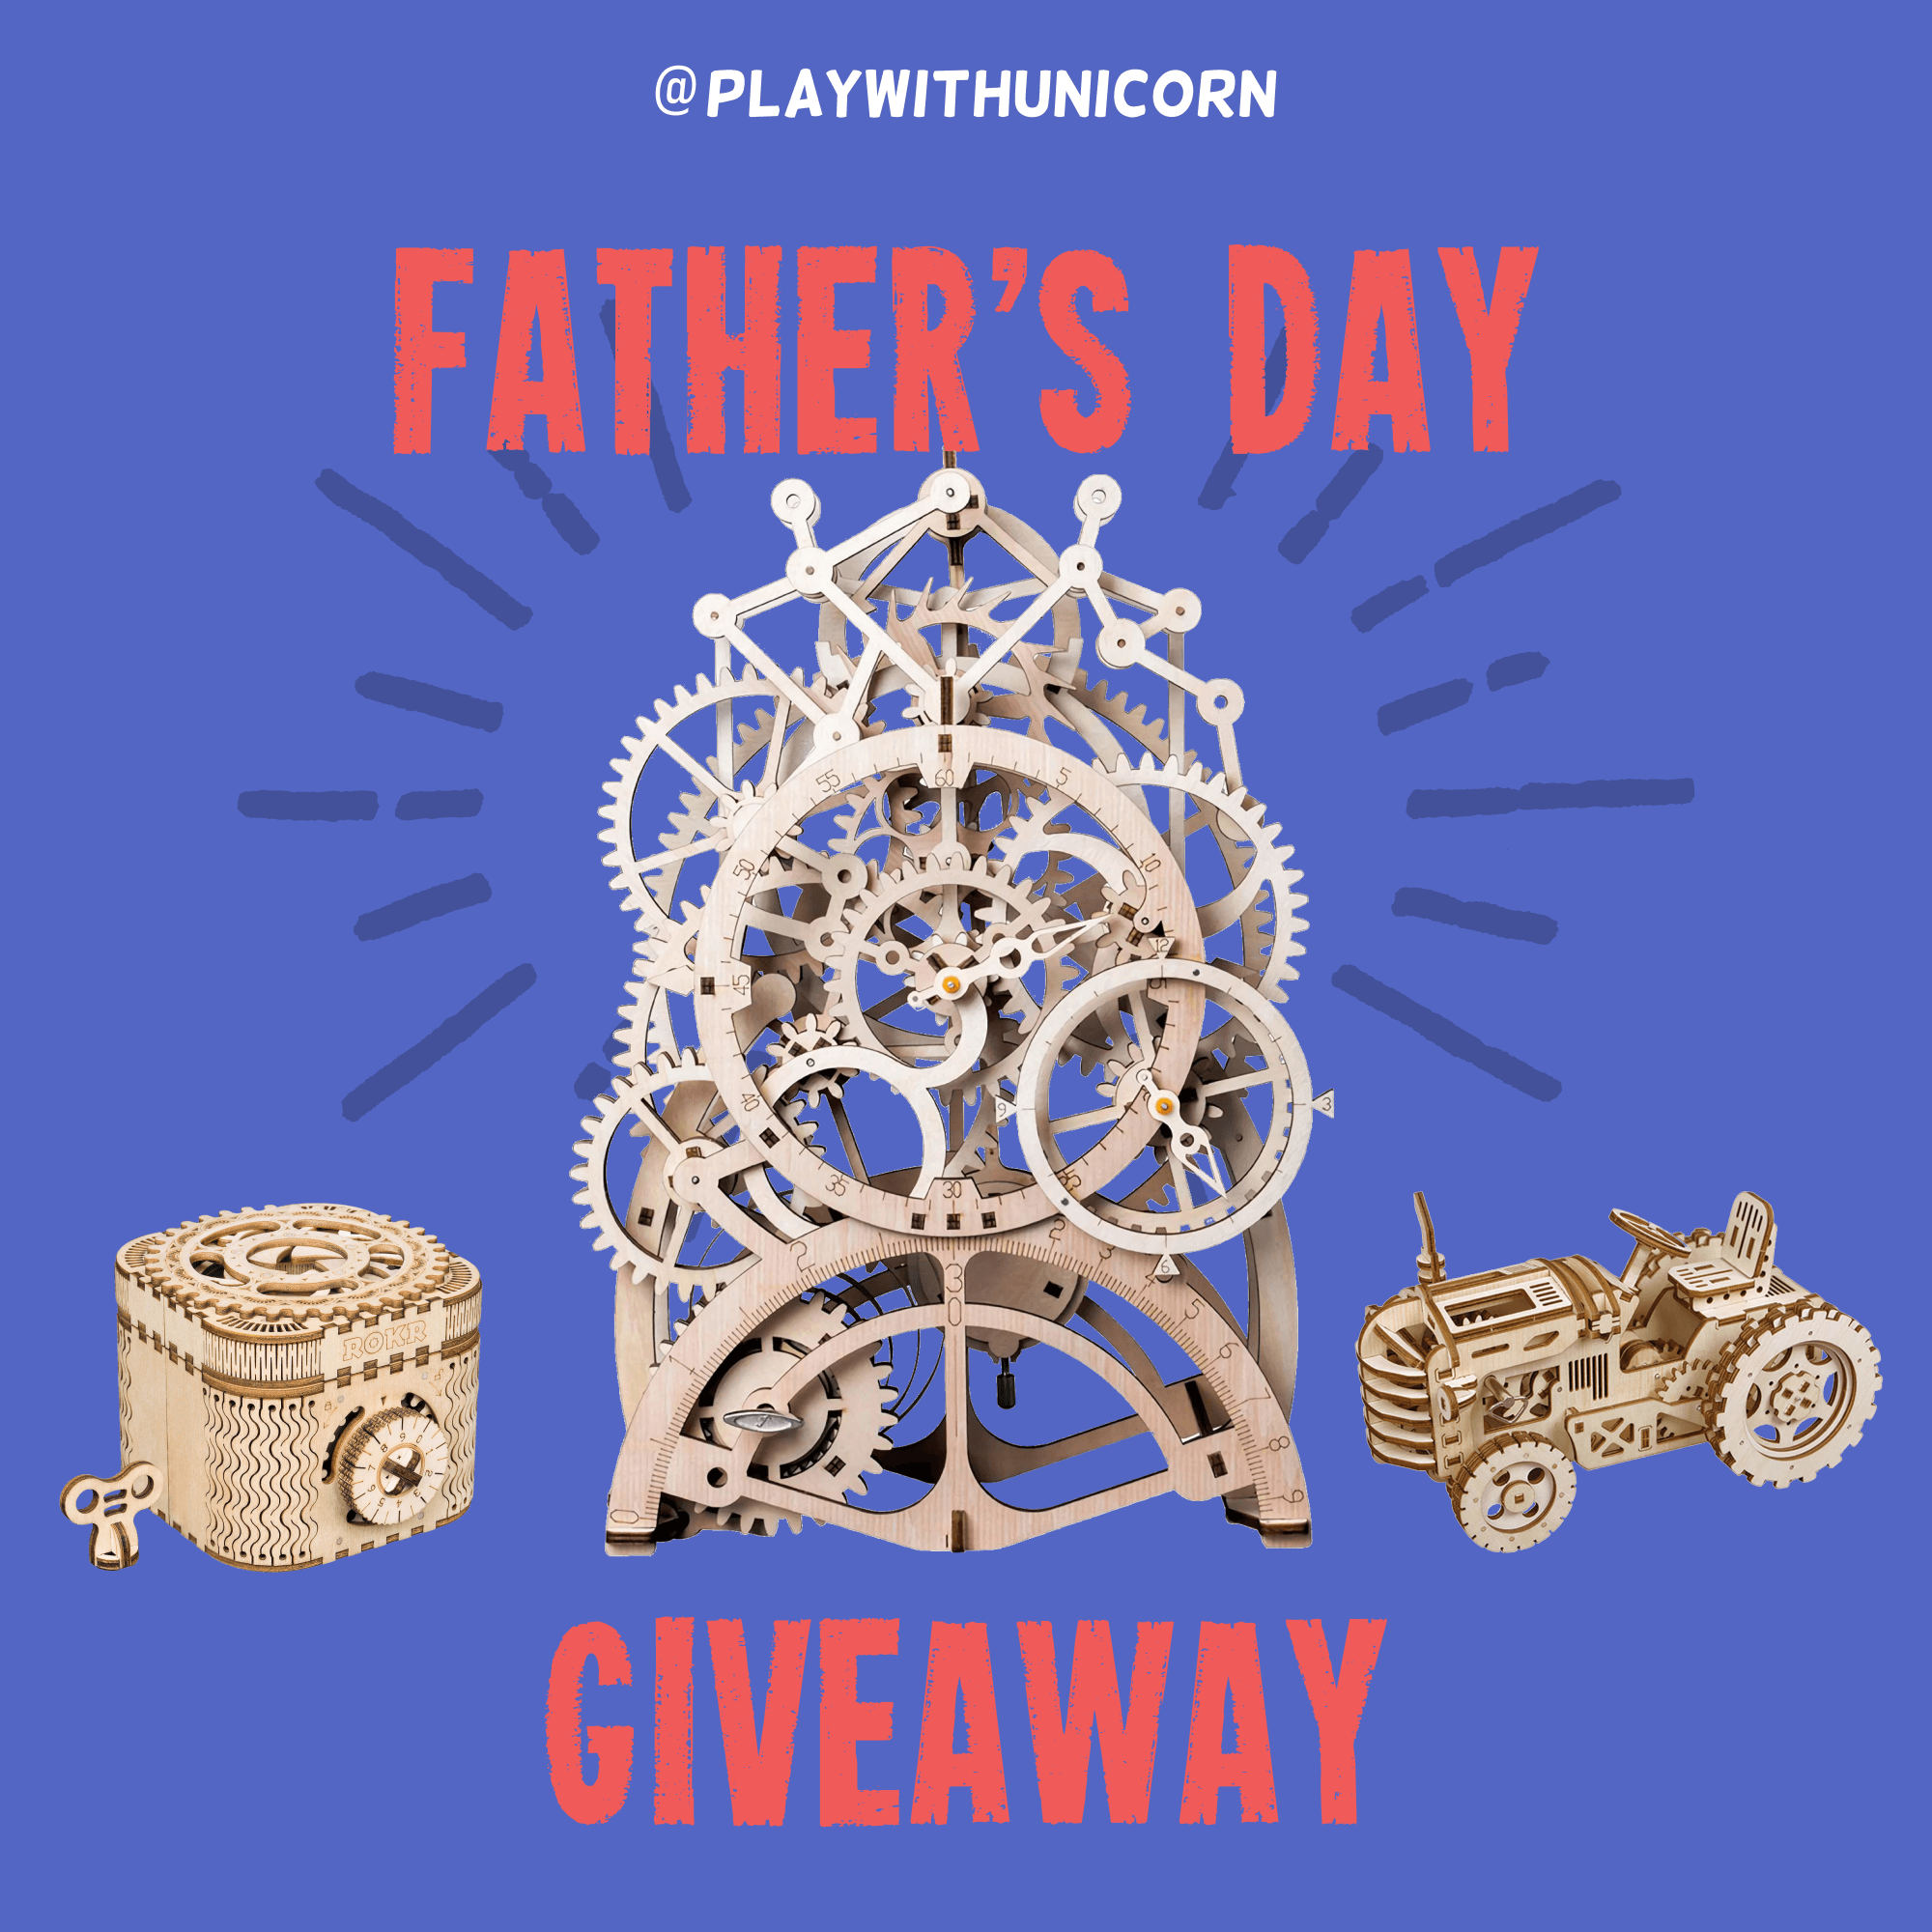 #FathersDay Giveaway